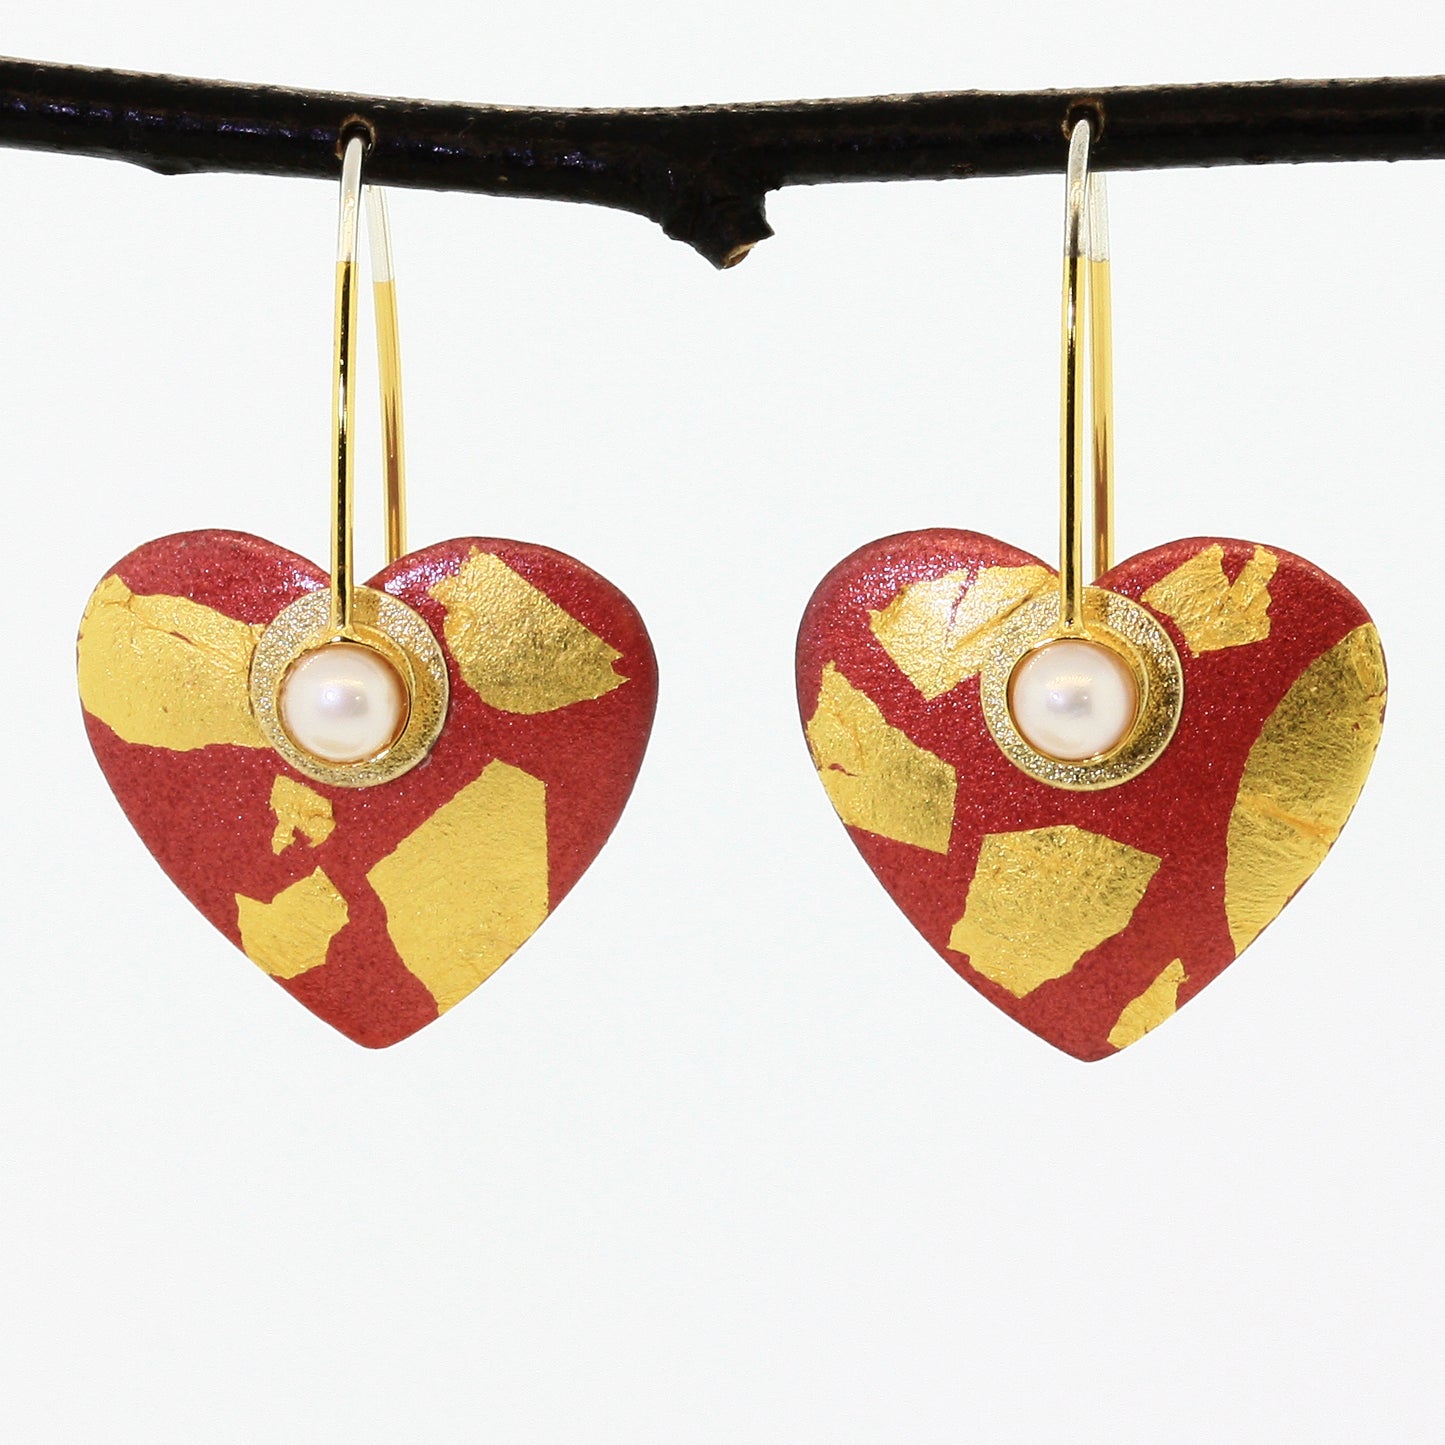 Small Heart Earrings-Donation to Domestic Violence Services